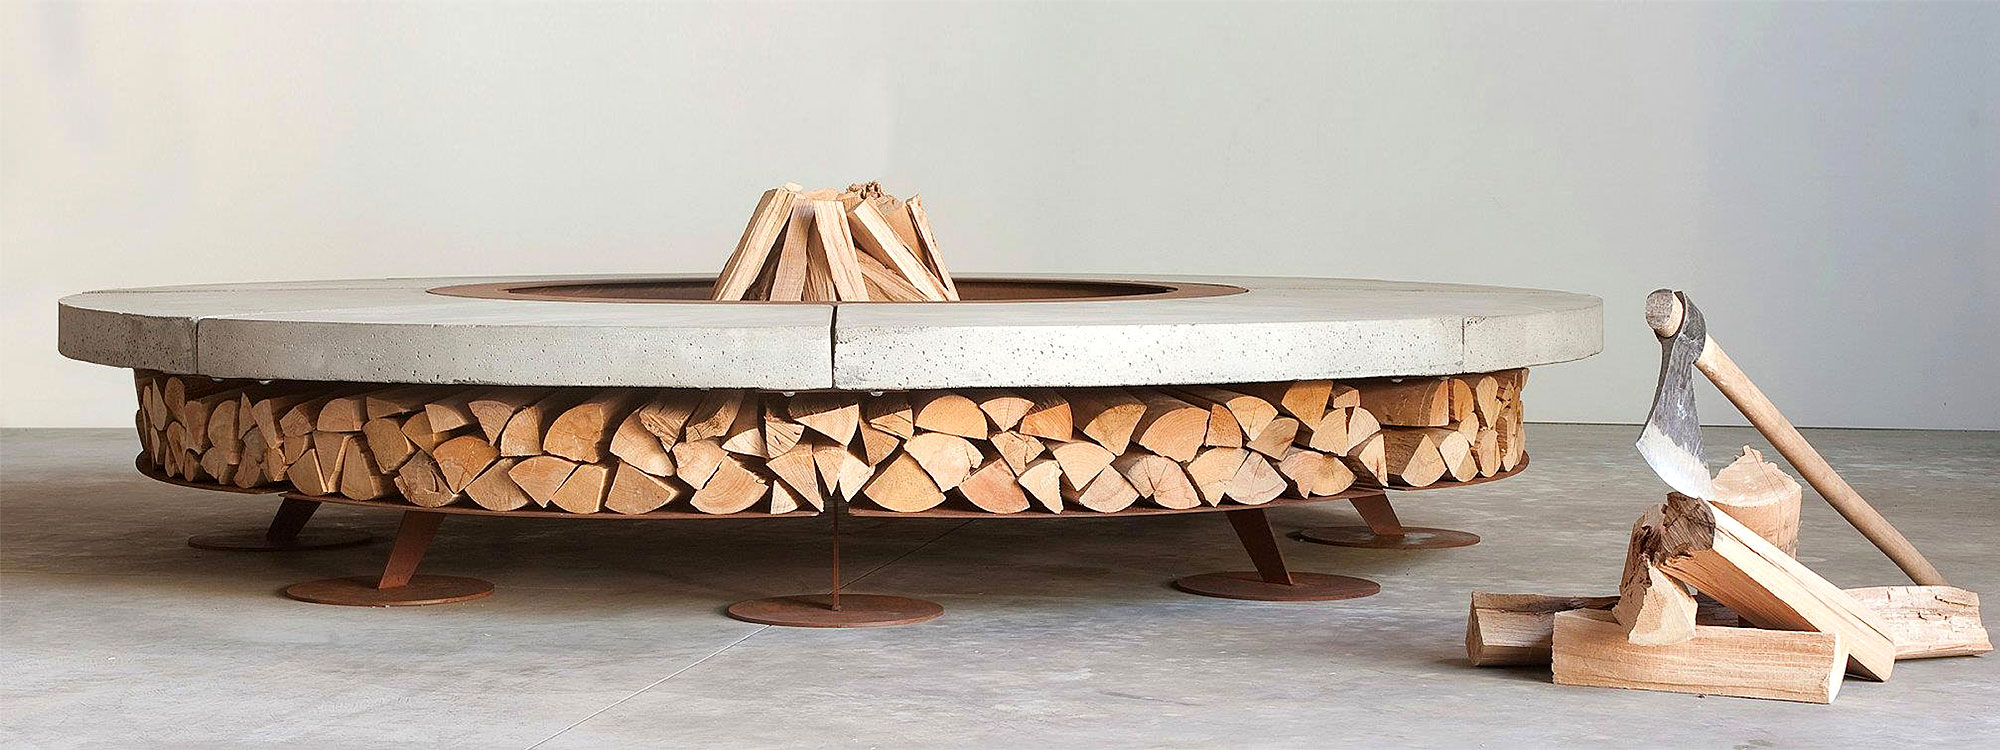 Studio image of AK47 Ercole fire pit with integrated log store, with axe and firewood to the side on the floor